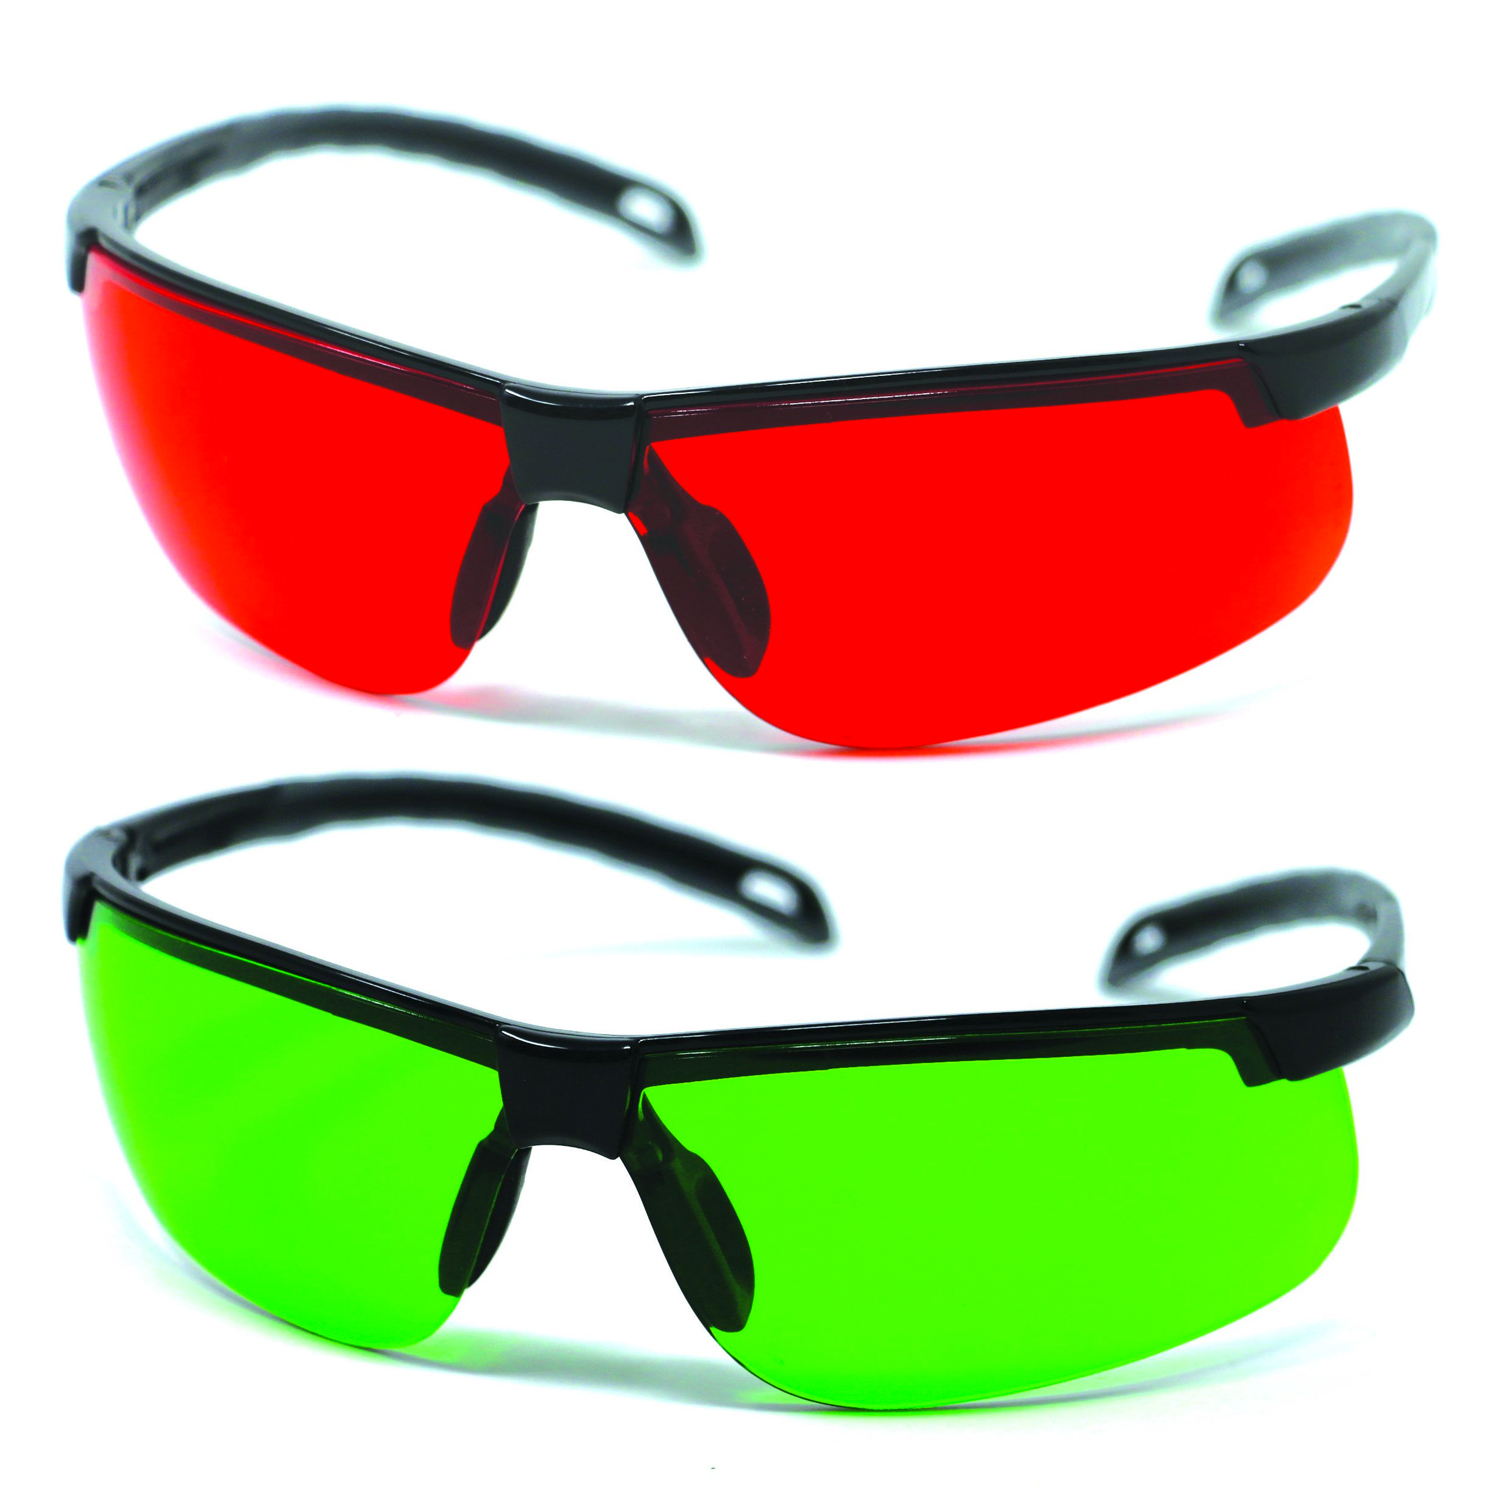 LaserVision Red & Green Glasses